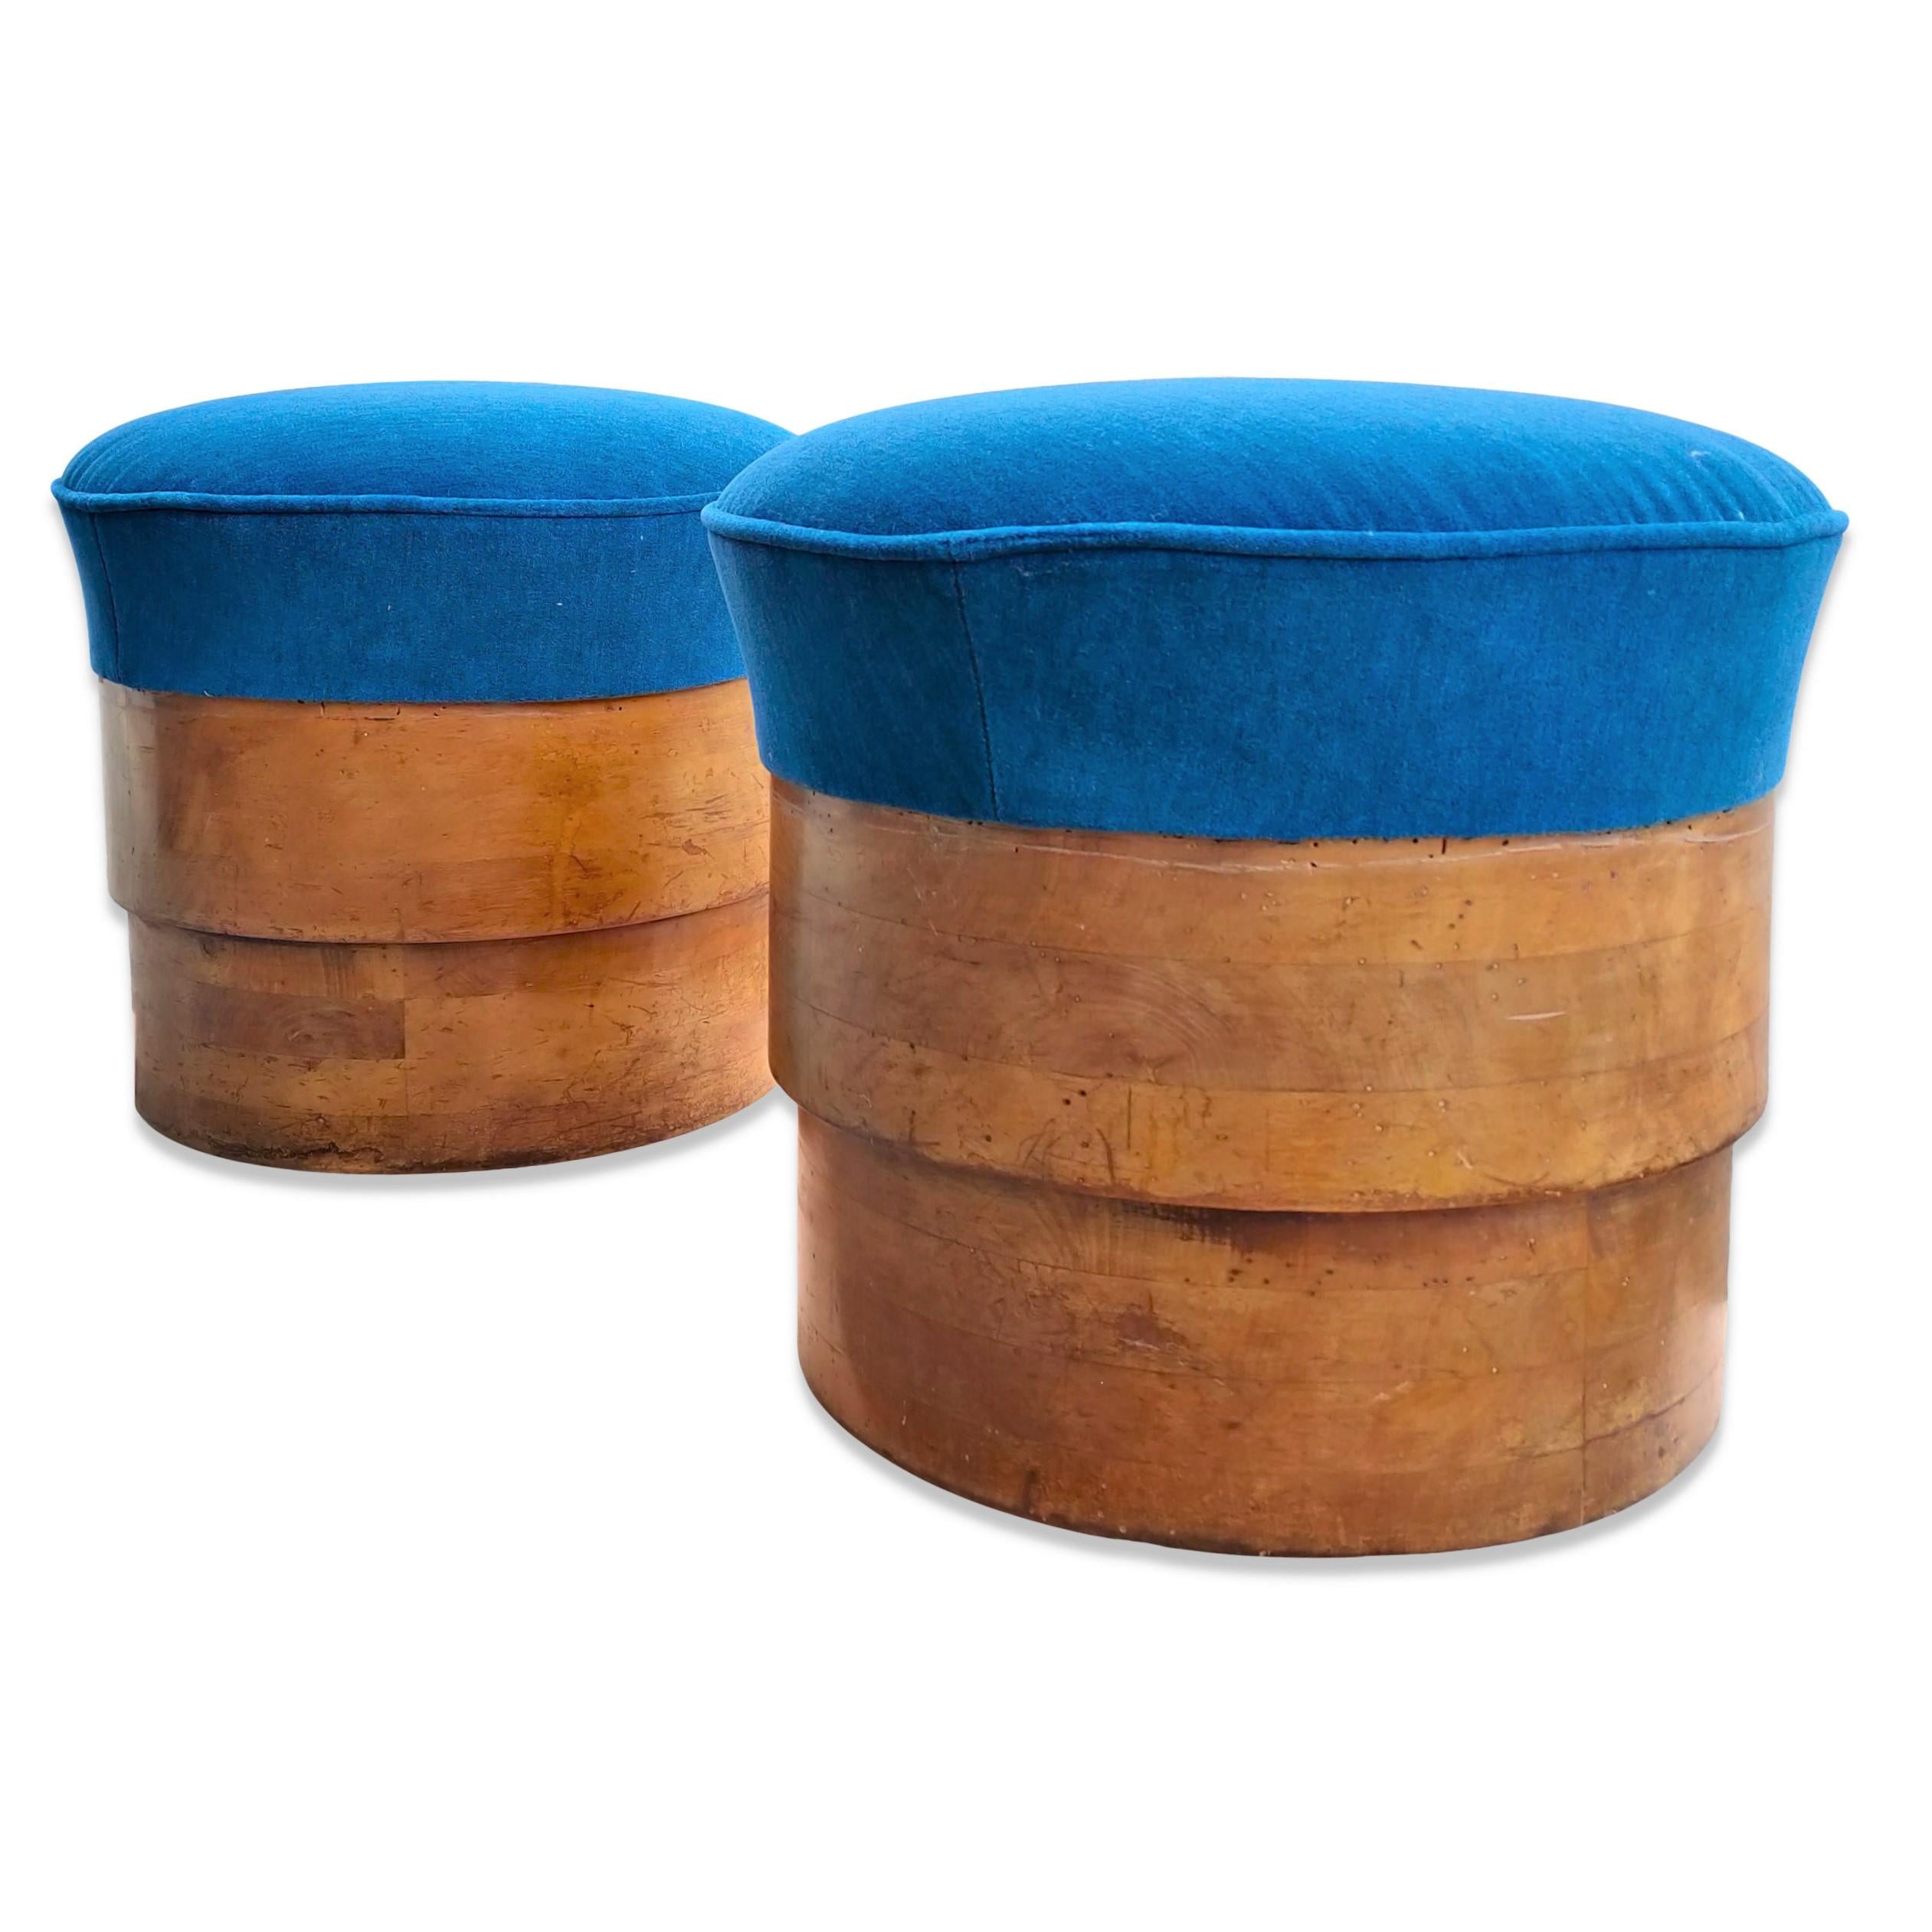 Elegant pair of early 2Oth century stools
the base is made of two stacked circles of dense solid fruitwood (probably pear tree)
the stools have been elegantly restored with a gloss varnish 
the blue mohair upholstery is new as well 
these stools